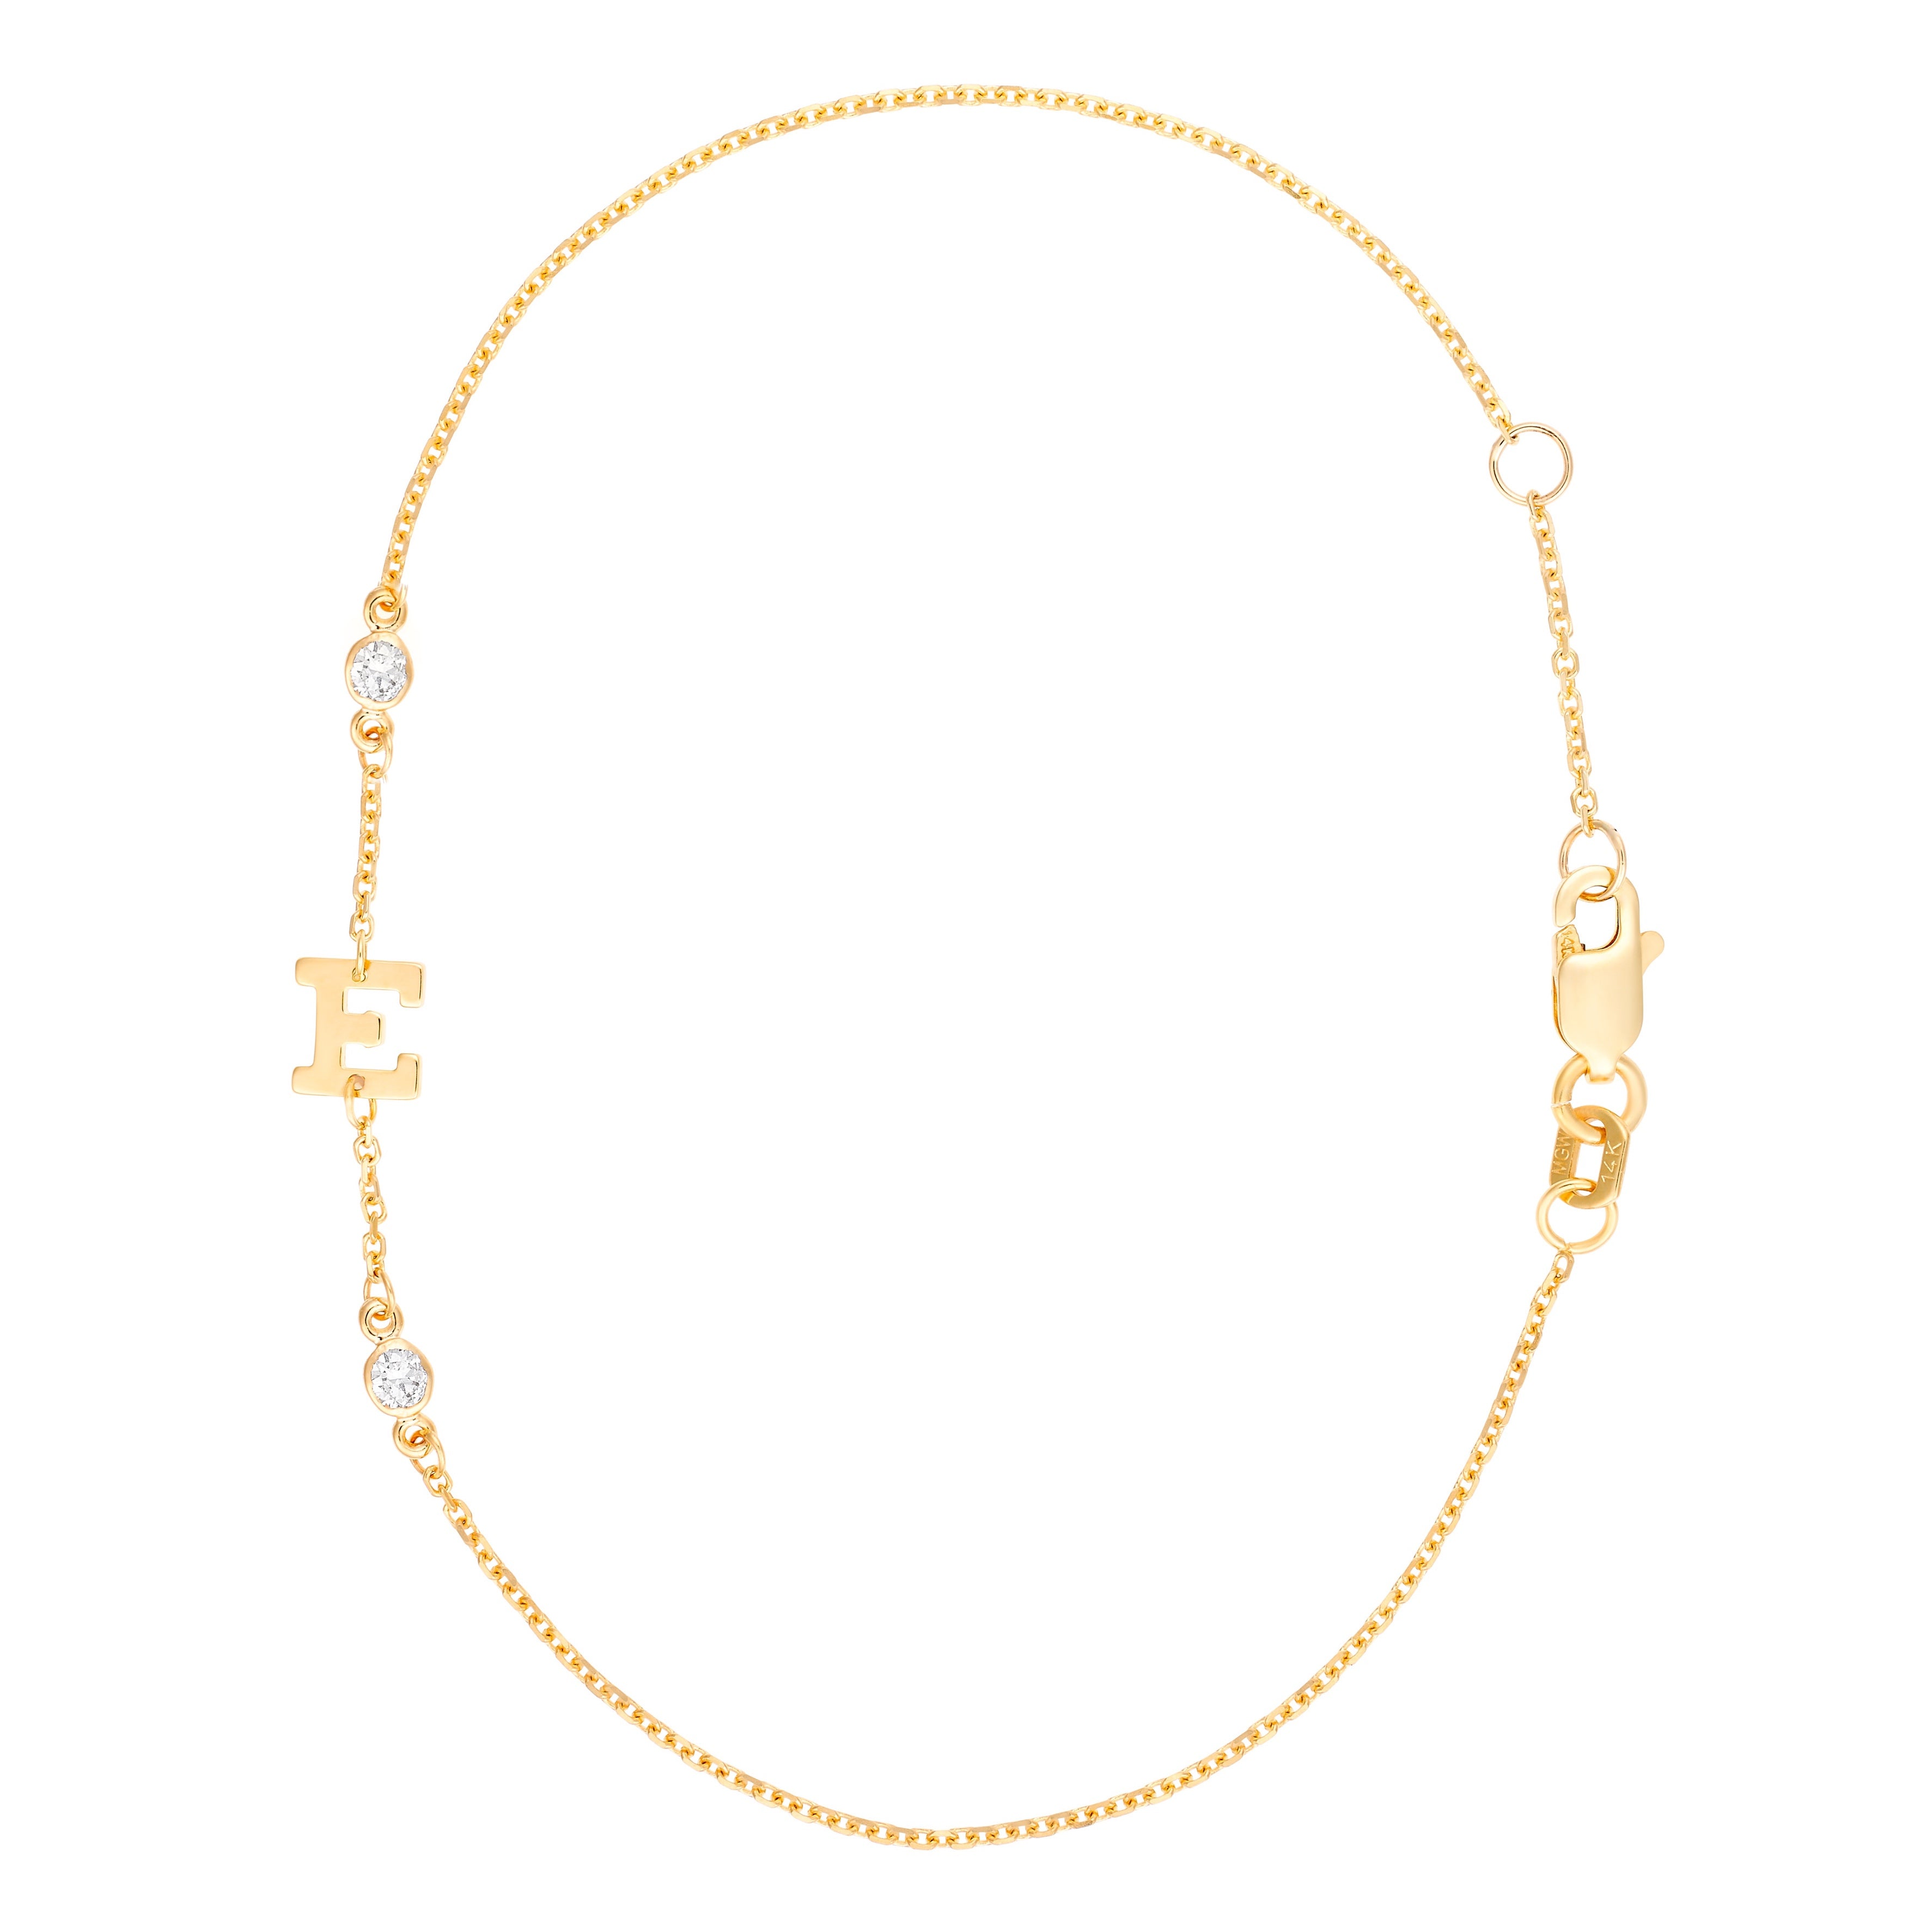 Gold Rush- Diamond single initial with Two Diamond Accents in Chain- Lola James Jewelry 